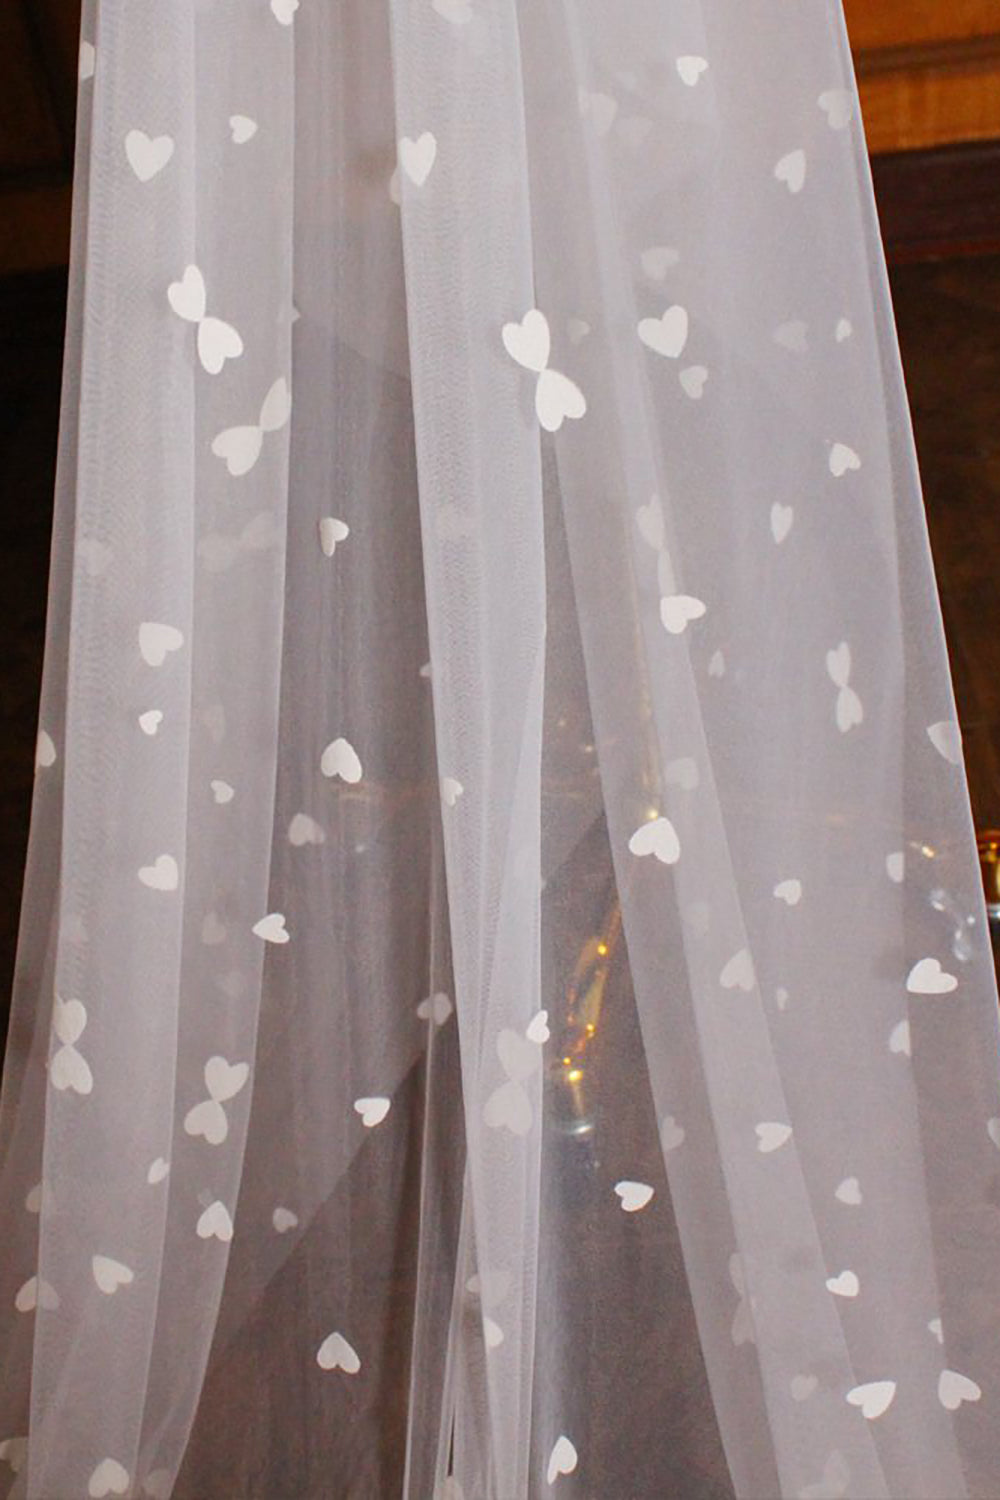 White One-Tier Cut Edge Long Tulle Chapel Bridal Veil with Hearts